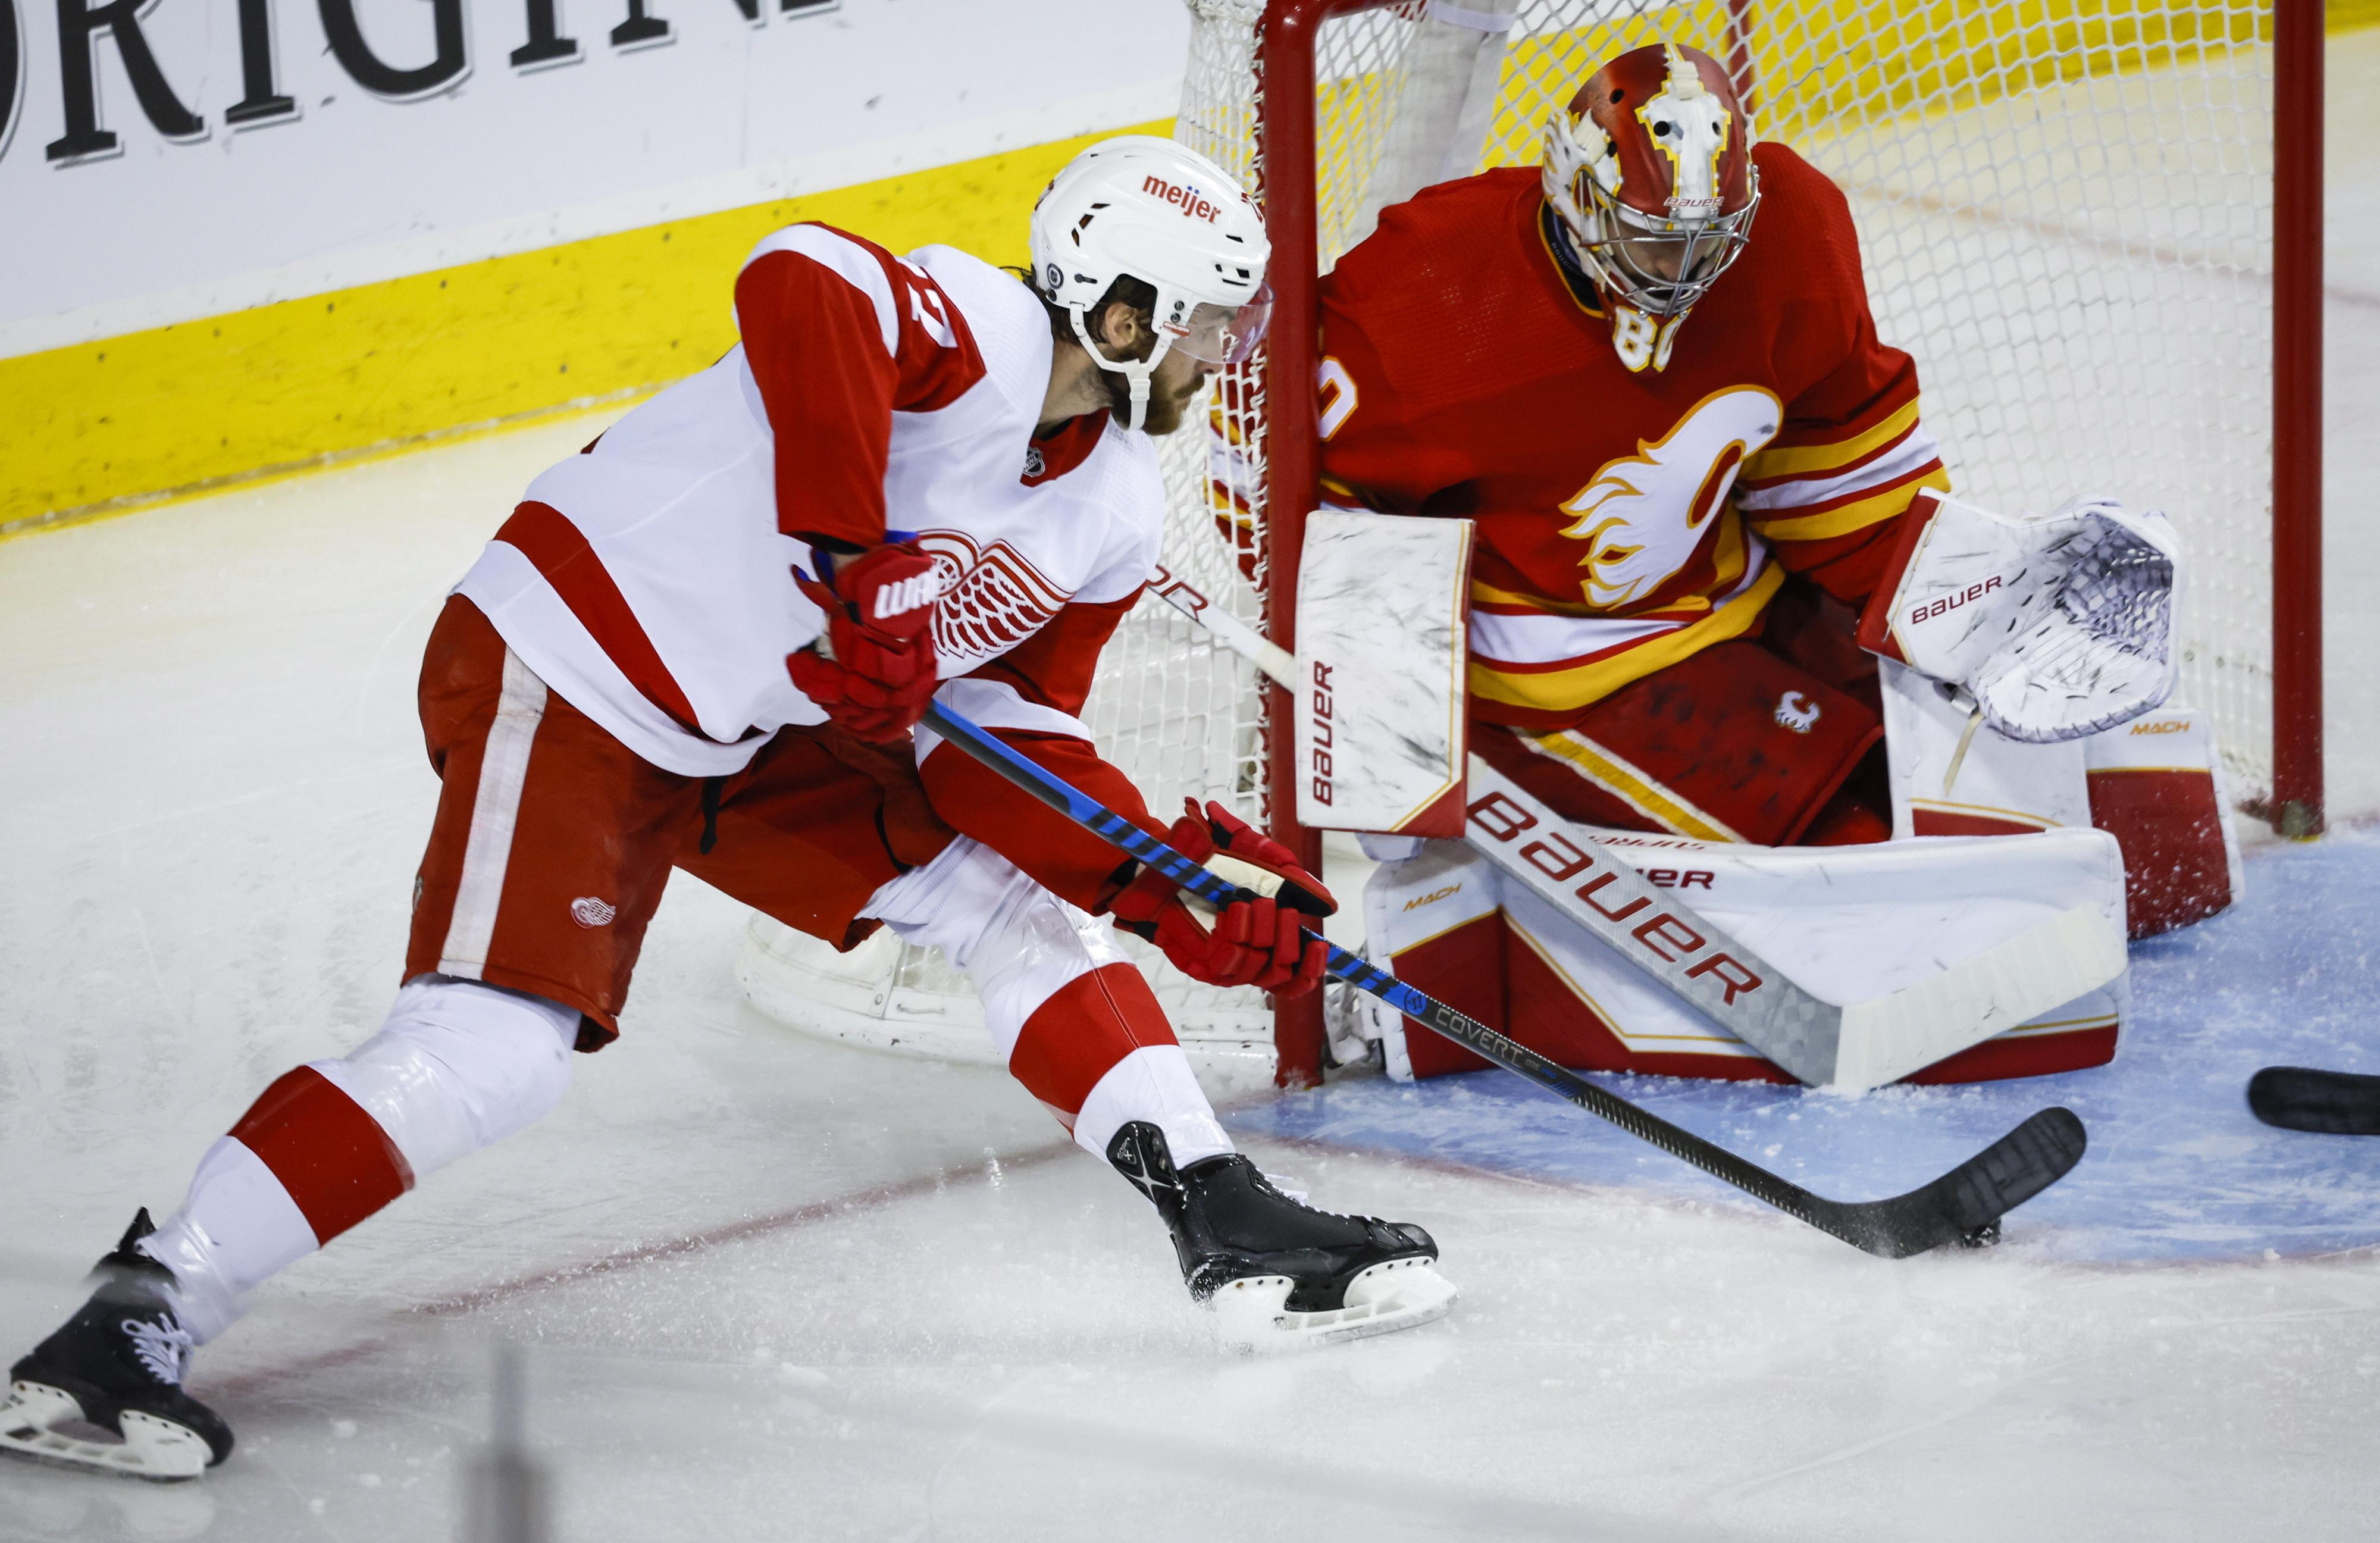 Here's the NHL's five-point plan to combat crosschecking next season